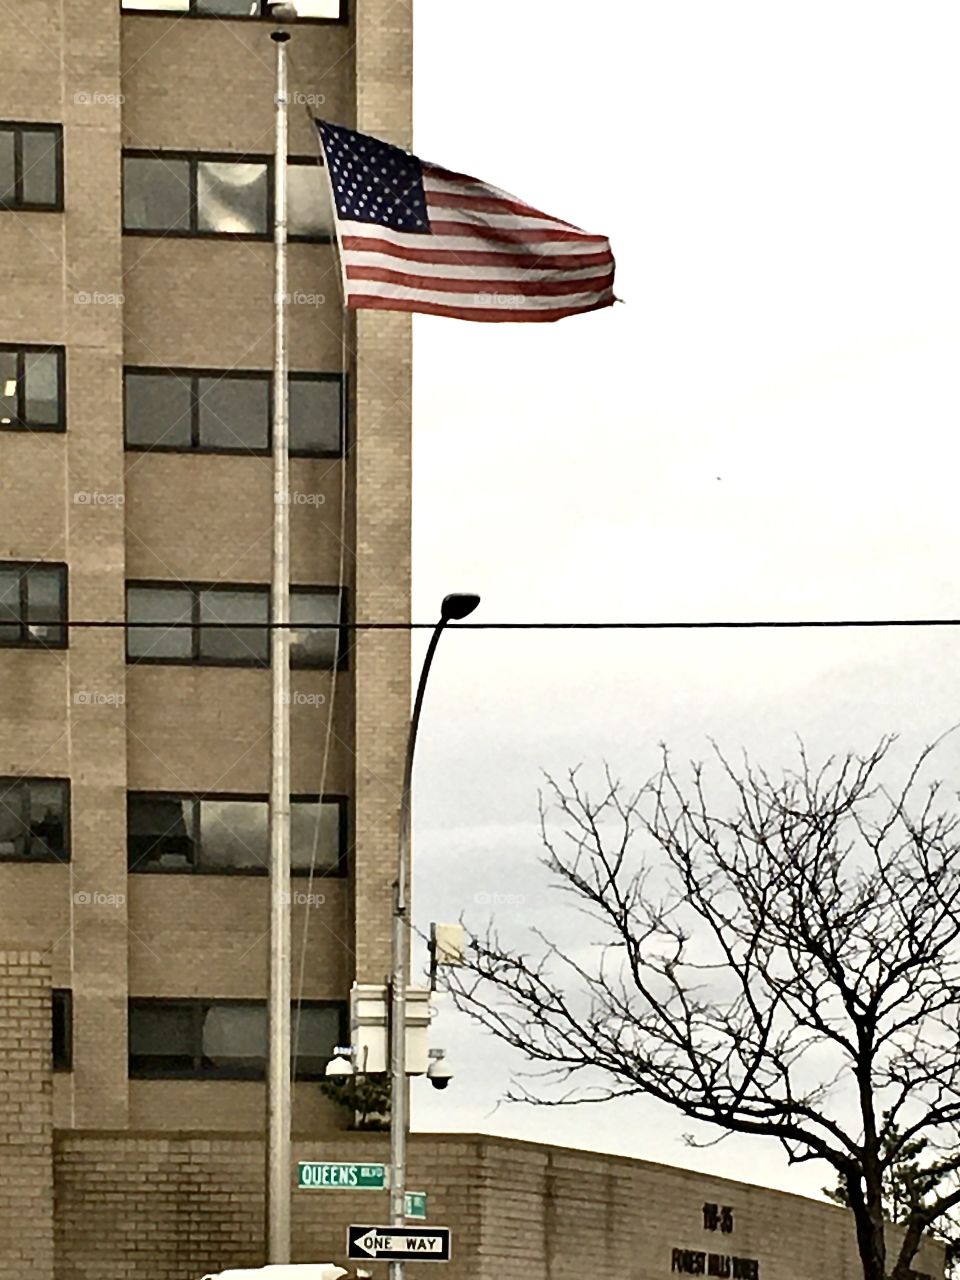 Flag, American flag, flying, high, flag pole, city, street, New York, street sign, one way, bare tree, tree, outside, exterior, security camera, light pole, power line, electric line, building, windows, Queens sky, red, white, blue, stars, stripes